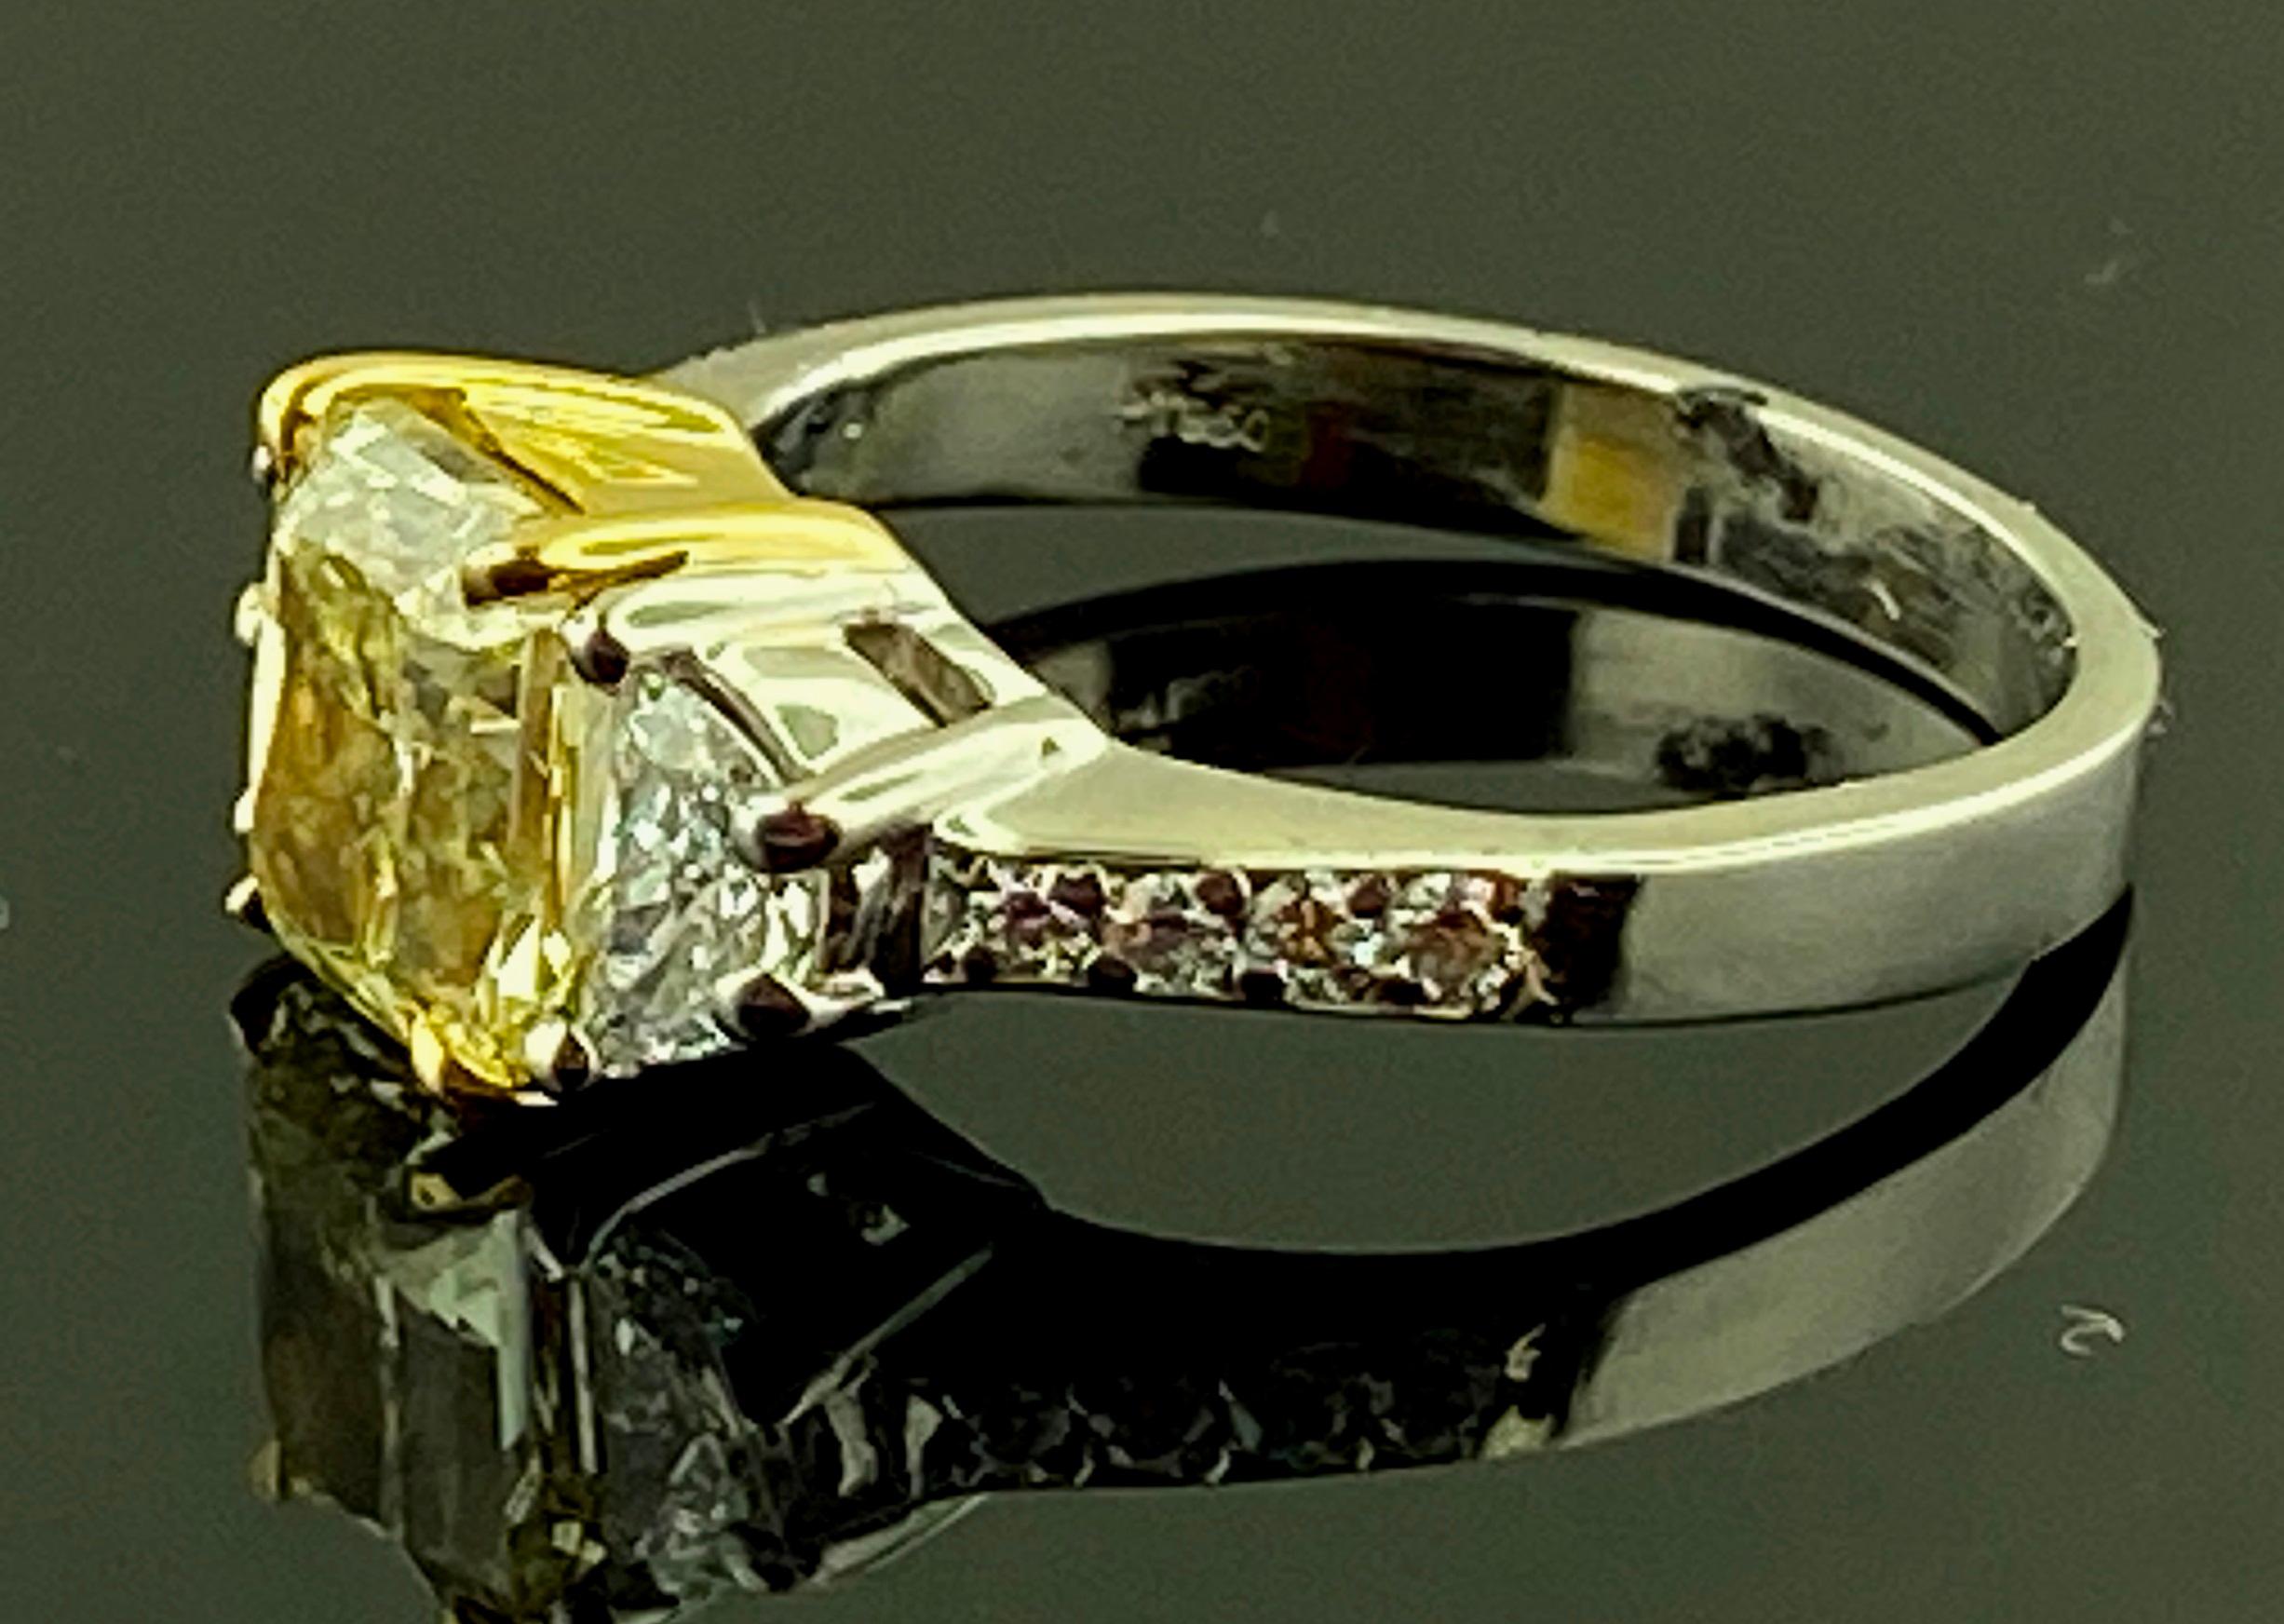 22 KT Yellow Gold & Platinum 1.82 Ct Fancy Yellow Radiant Cut Diamond Ring In Excellent Condition For Sale In Palm Desert, CA